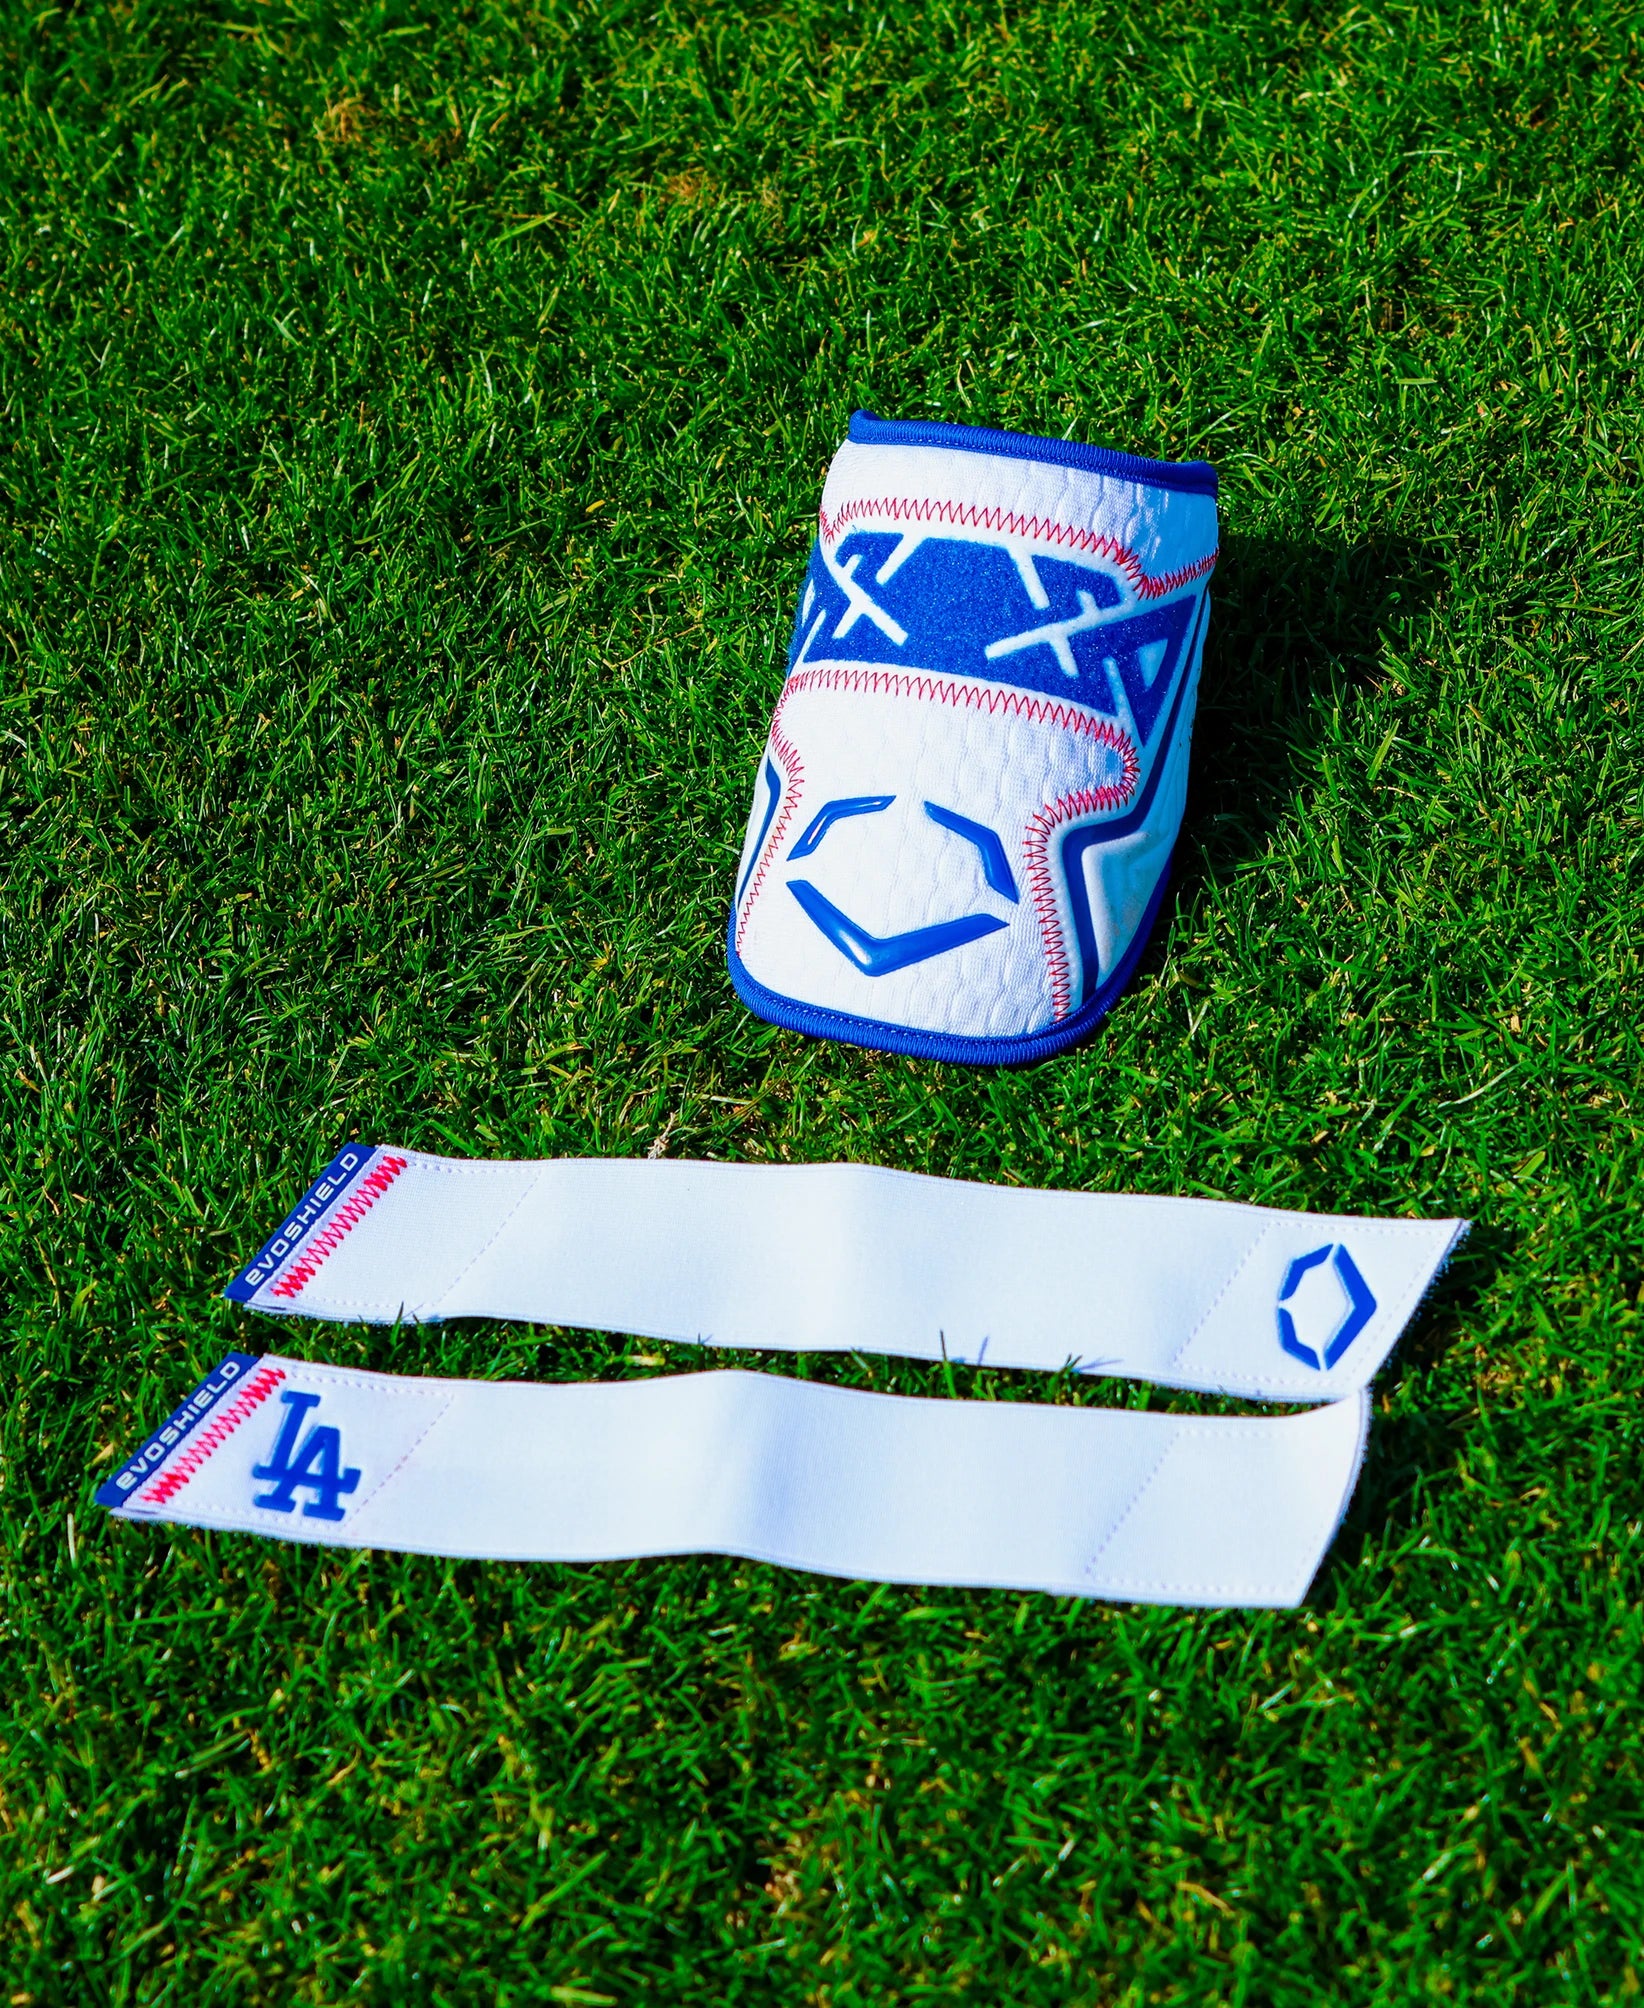 EvoShield PRO-SRZ 2.0 ON FIELD COLLECTION BATTER'S ELBOW GUARD: DODGERS